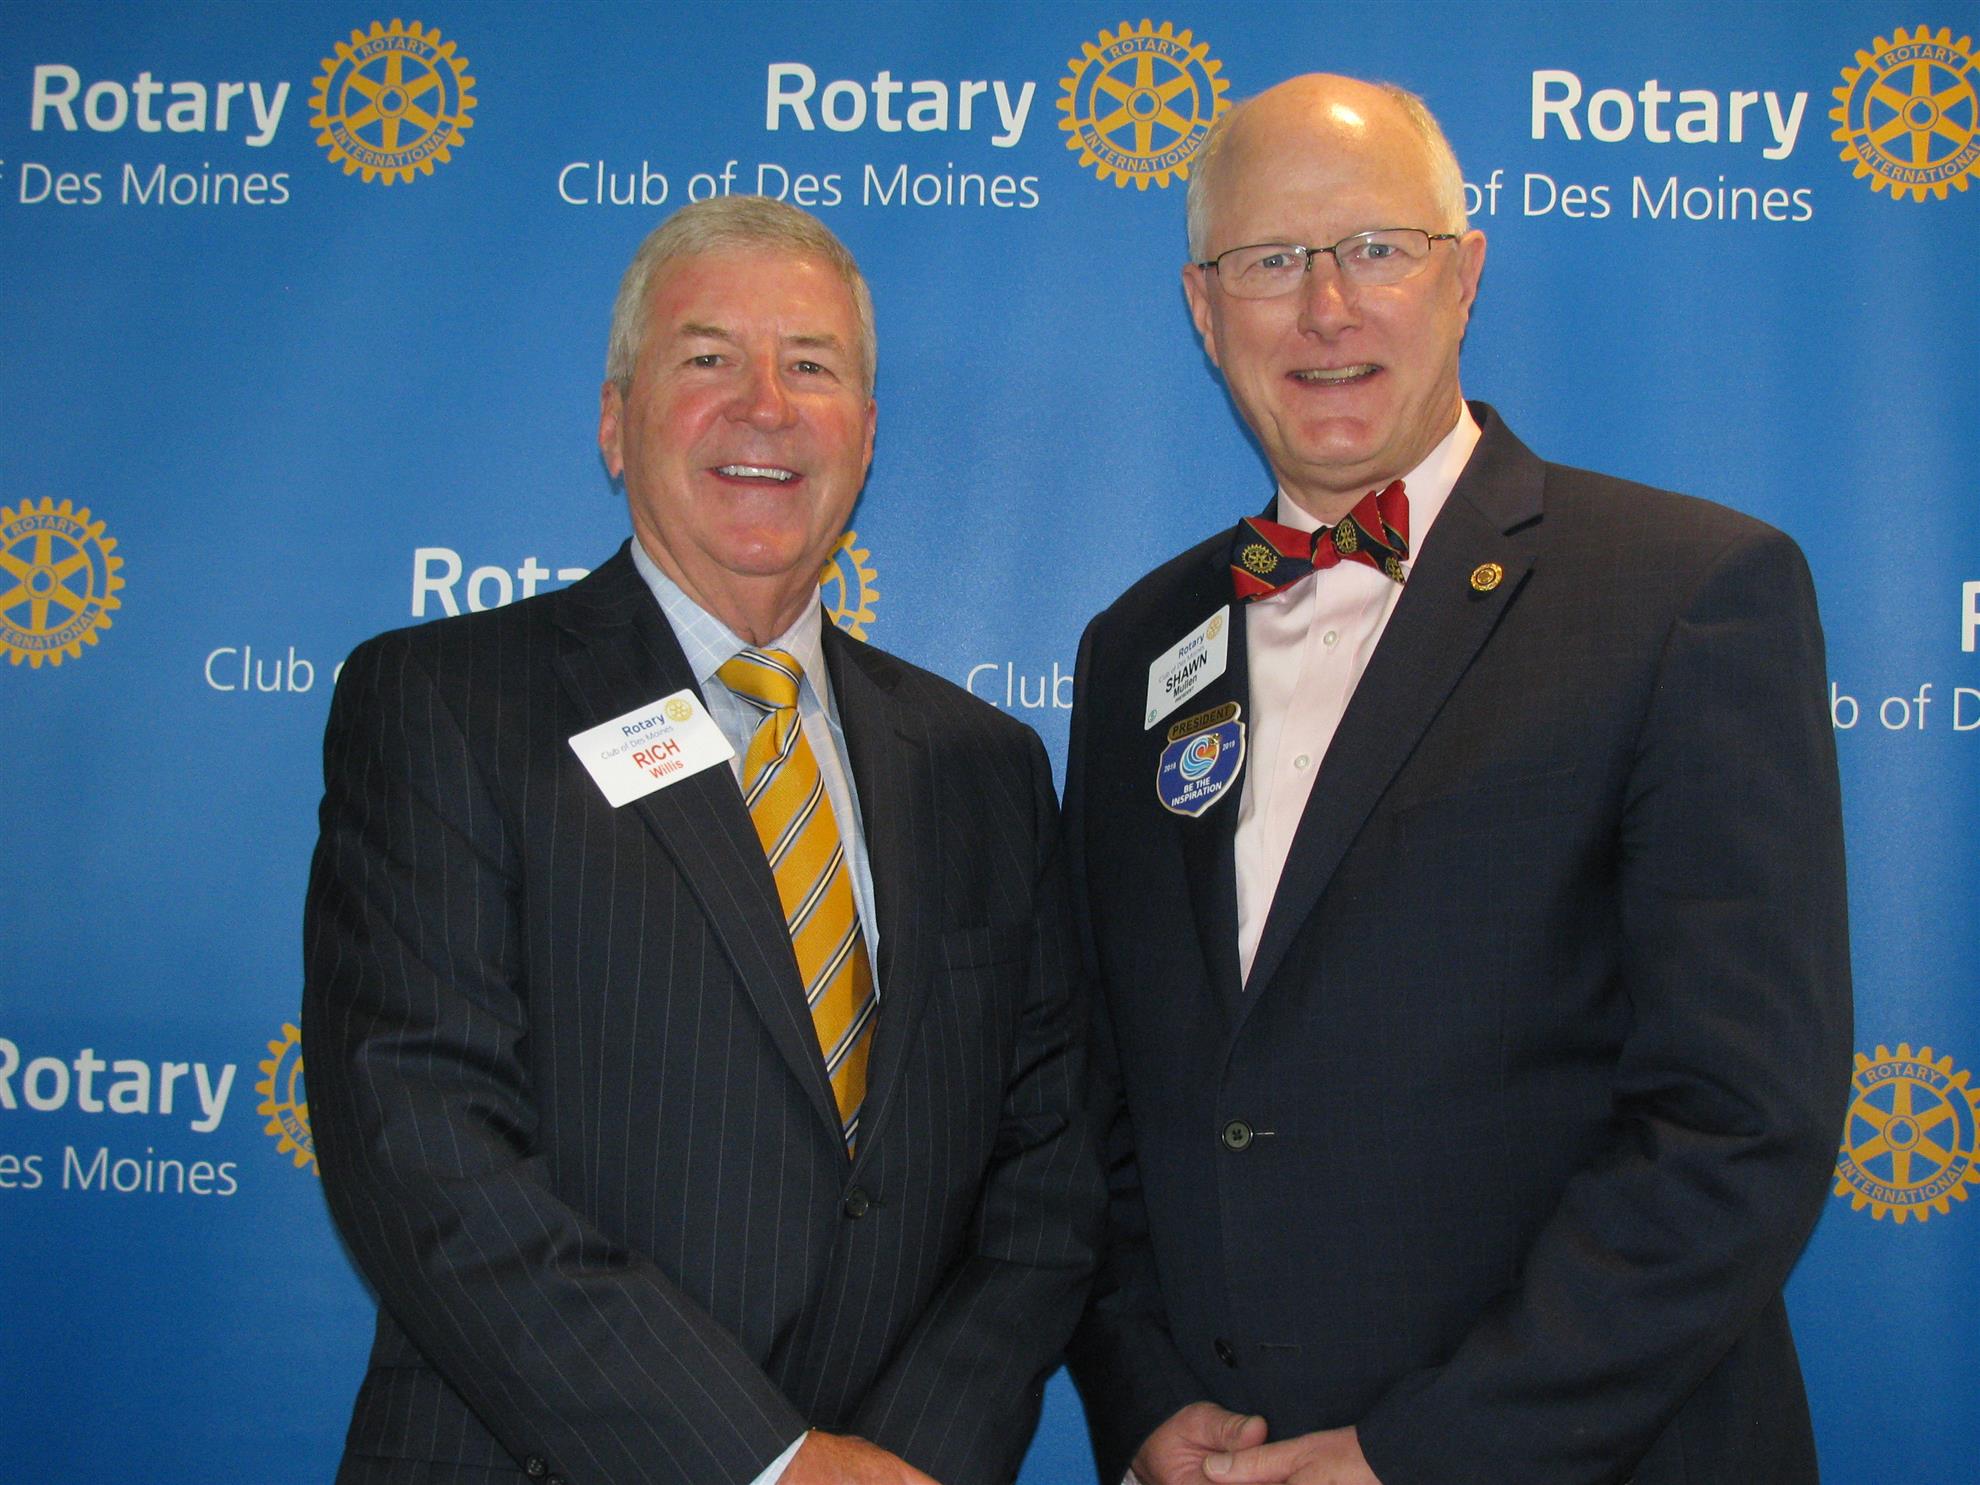 Rich Willis, Willis Automotive | Rotary Club of Des Moines